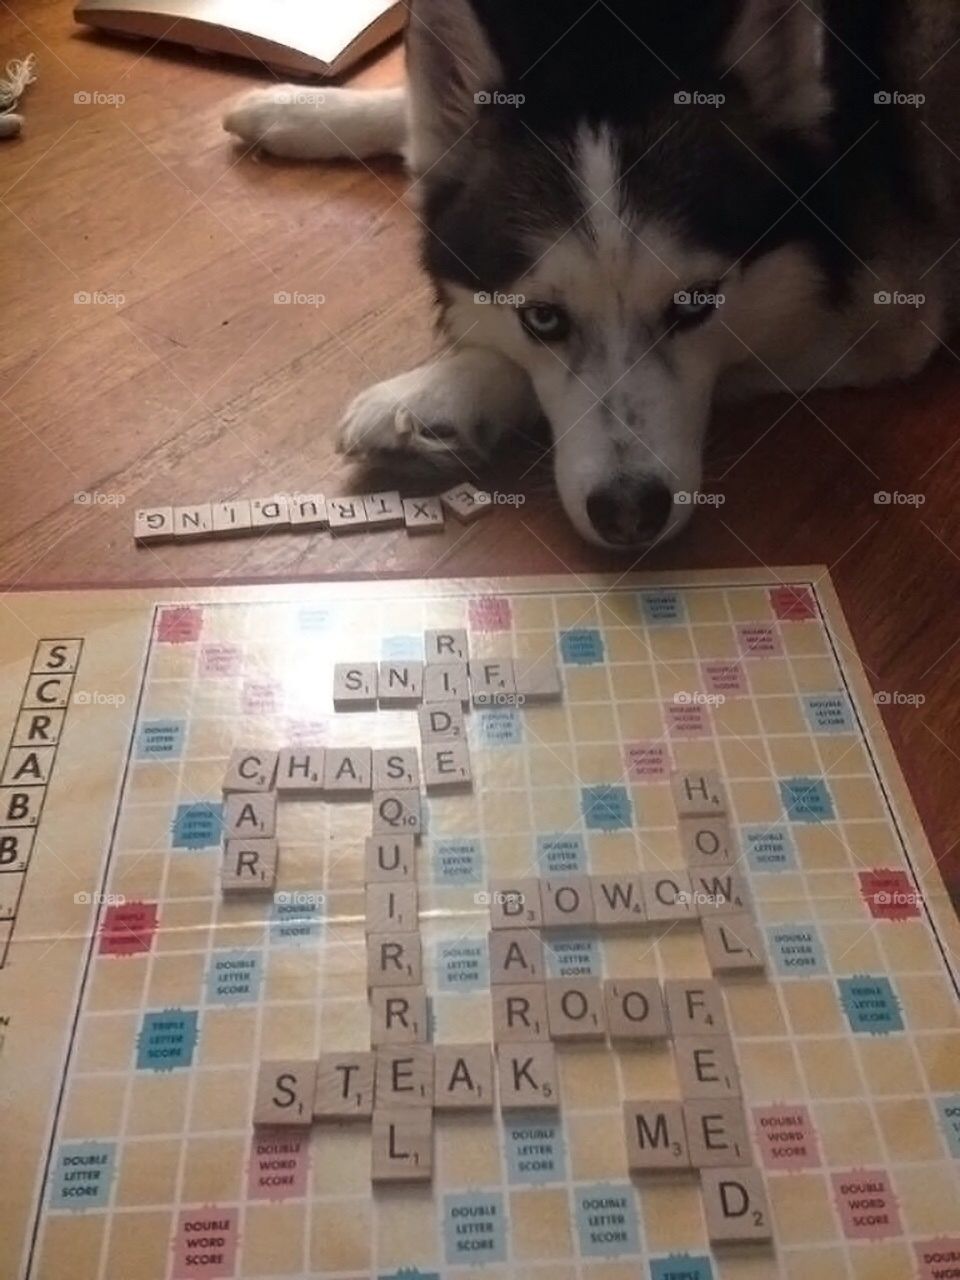 Husky owning at the game of scrabble